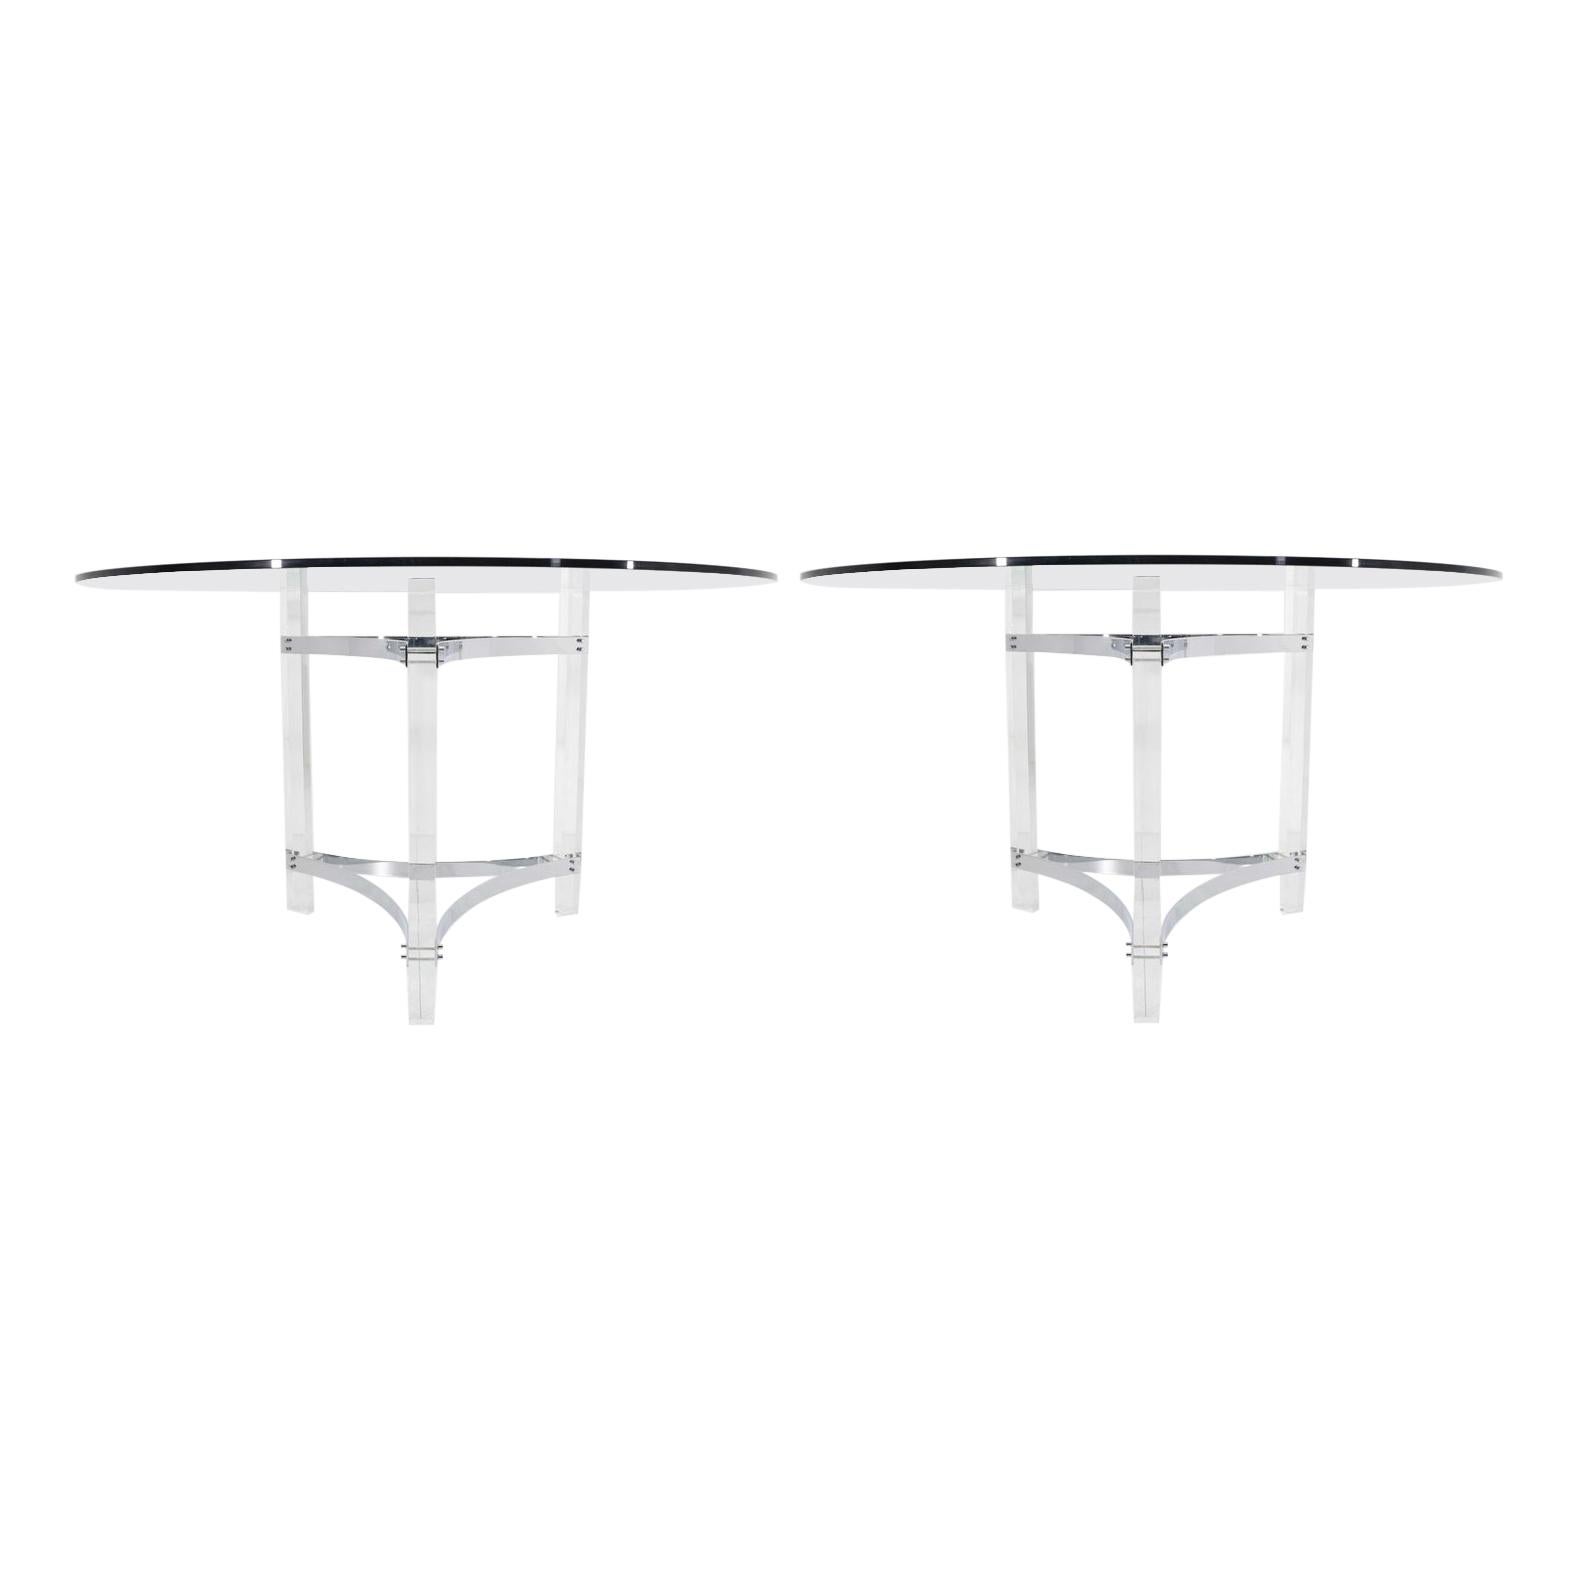 Charles Hollis Jones Table Bases in Chrome and Lucite